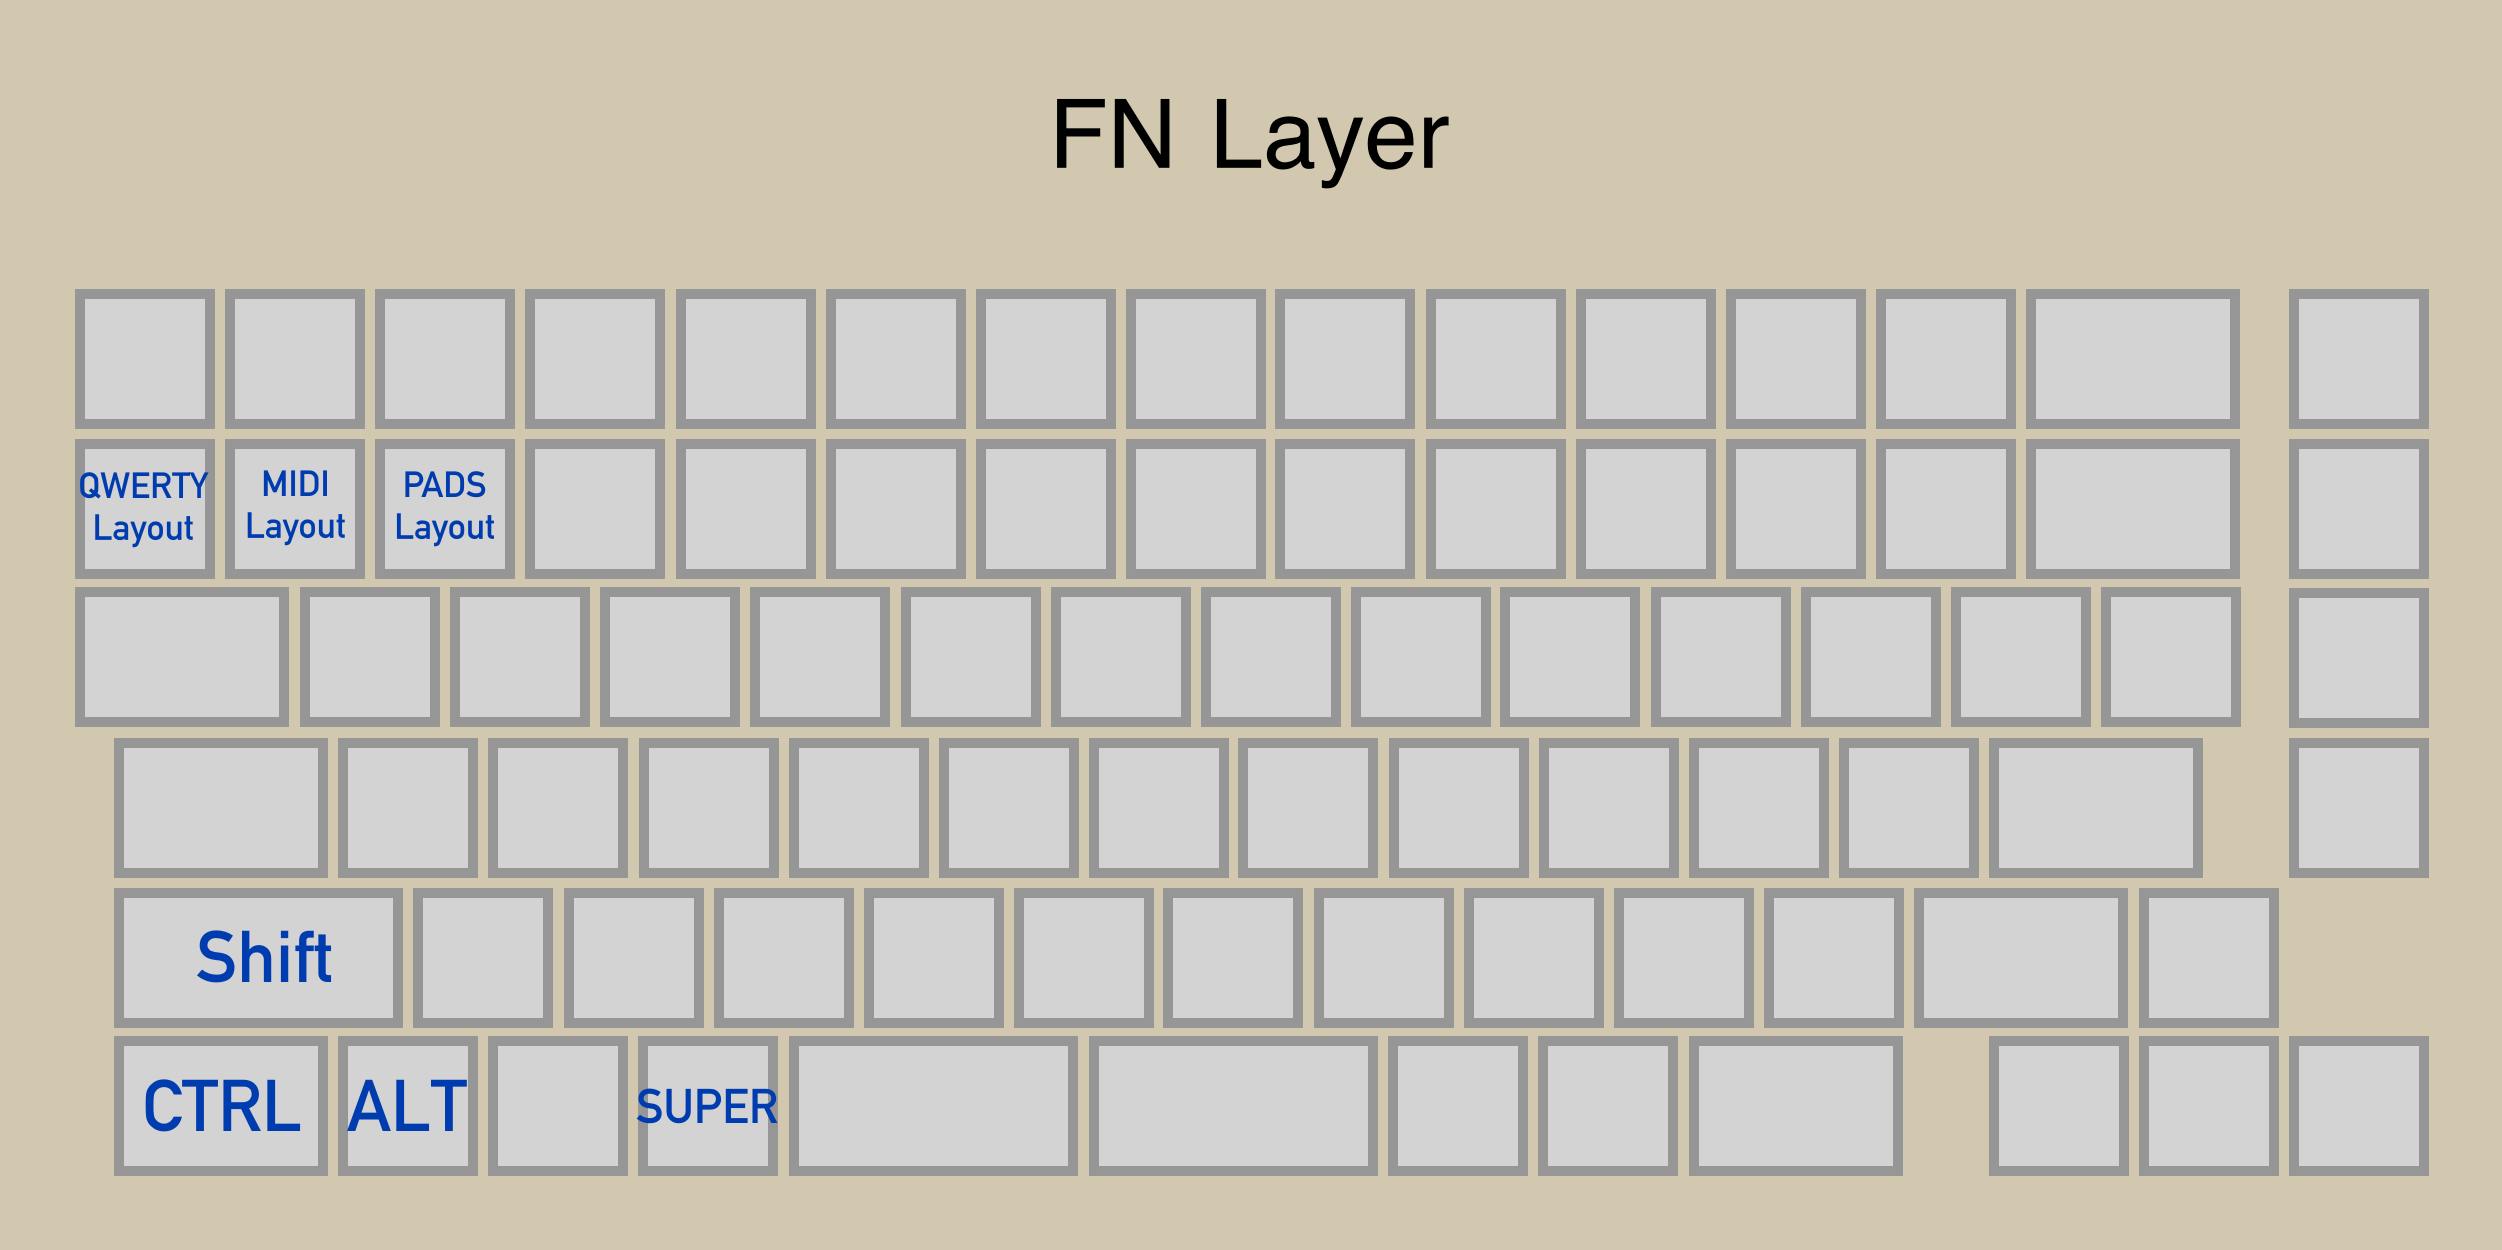 Keyboard layout showing possible functions after holdiing Fn on the Launch MIDI, including the QWERTY layer (Fn + ~), Piano layer (Fn + 1), and Drum layer (FN + 2).